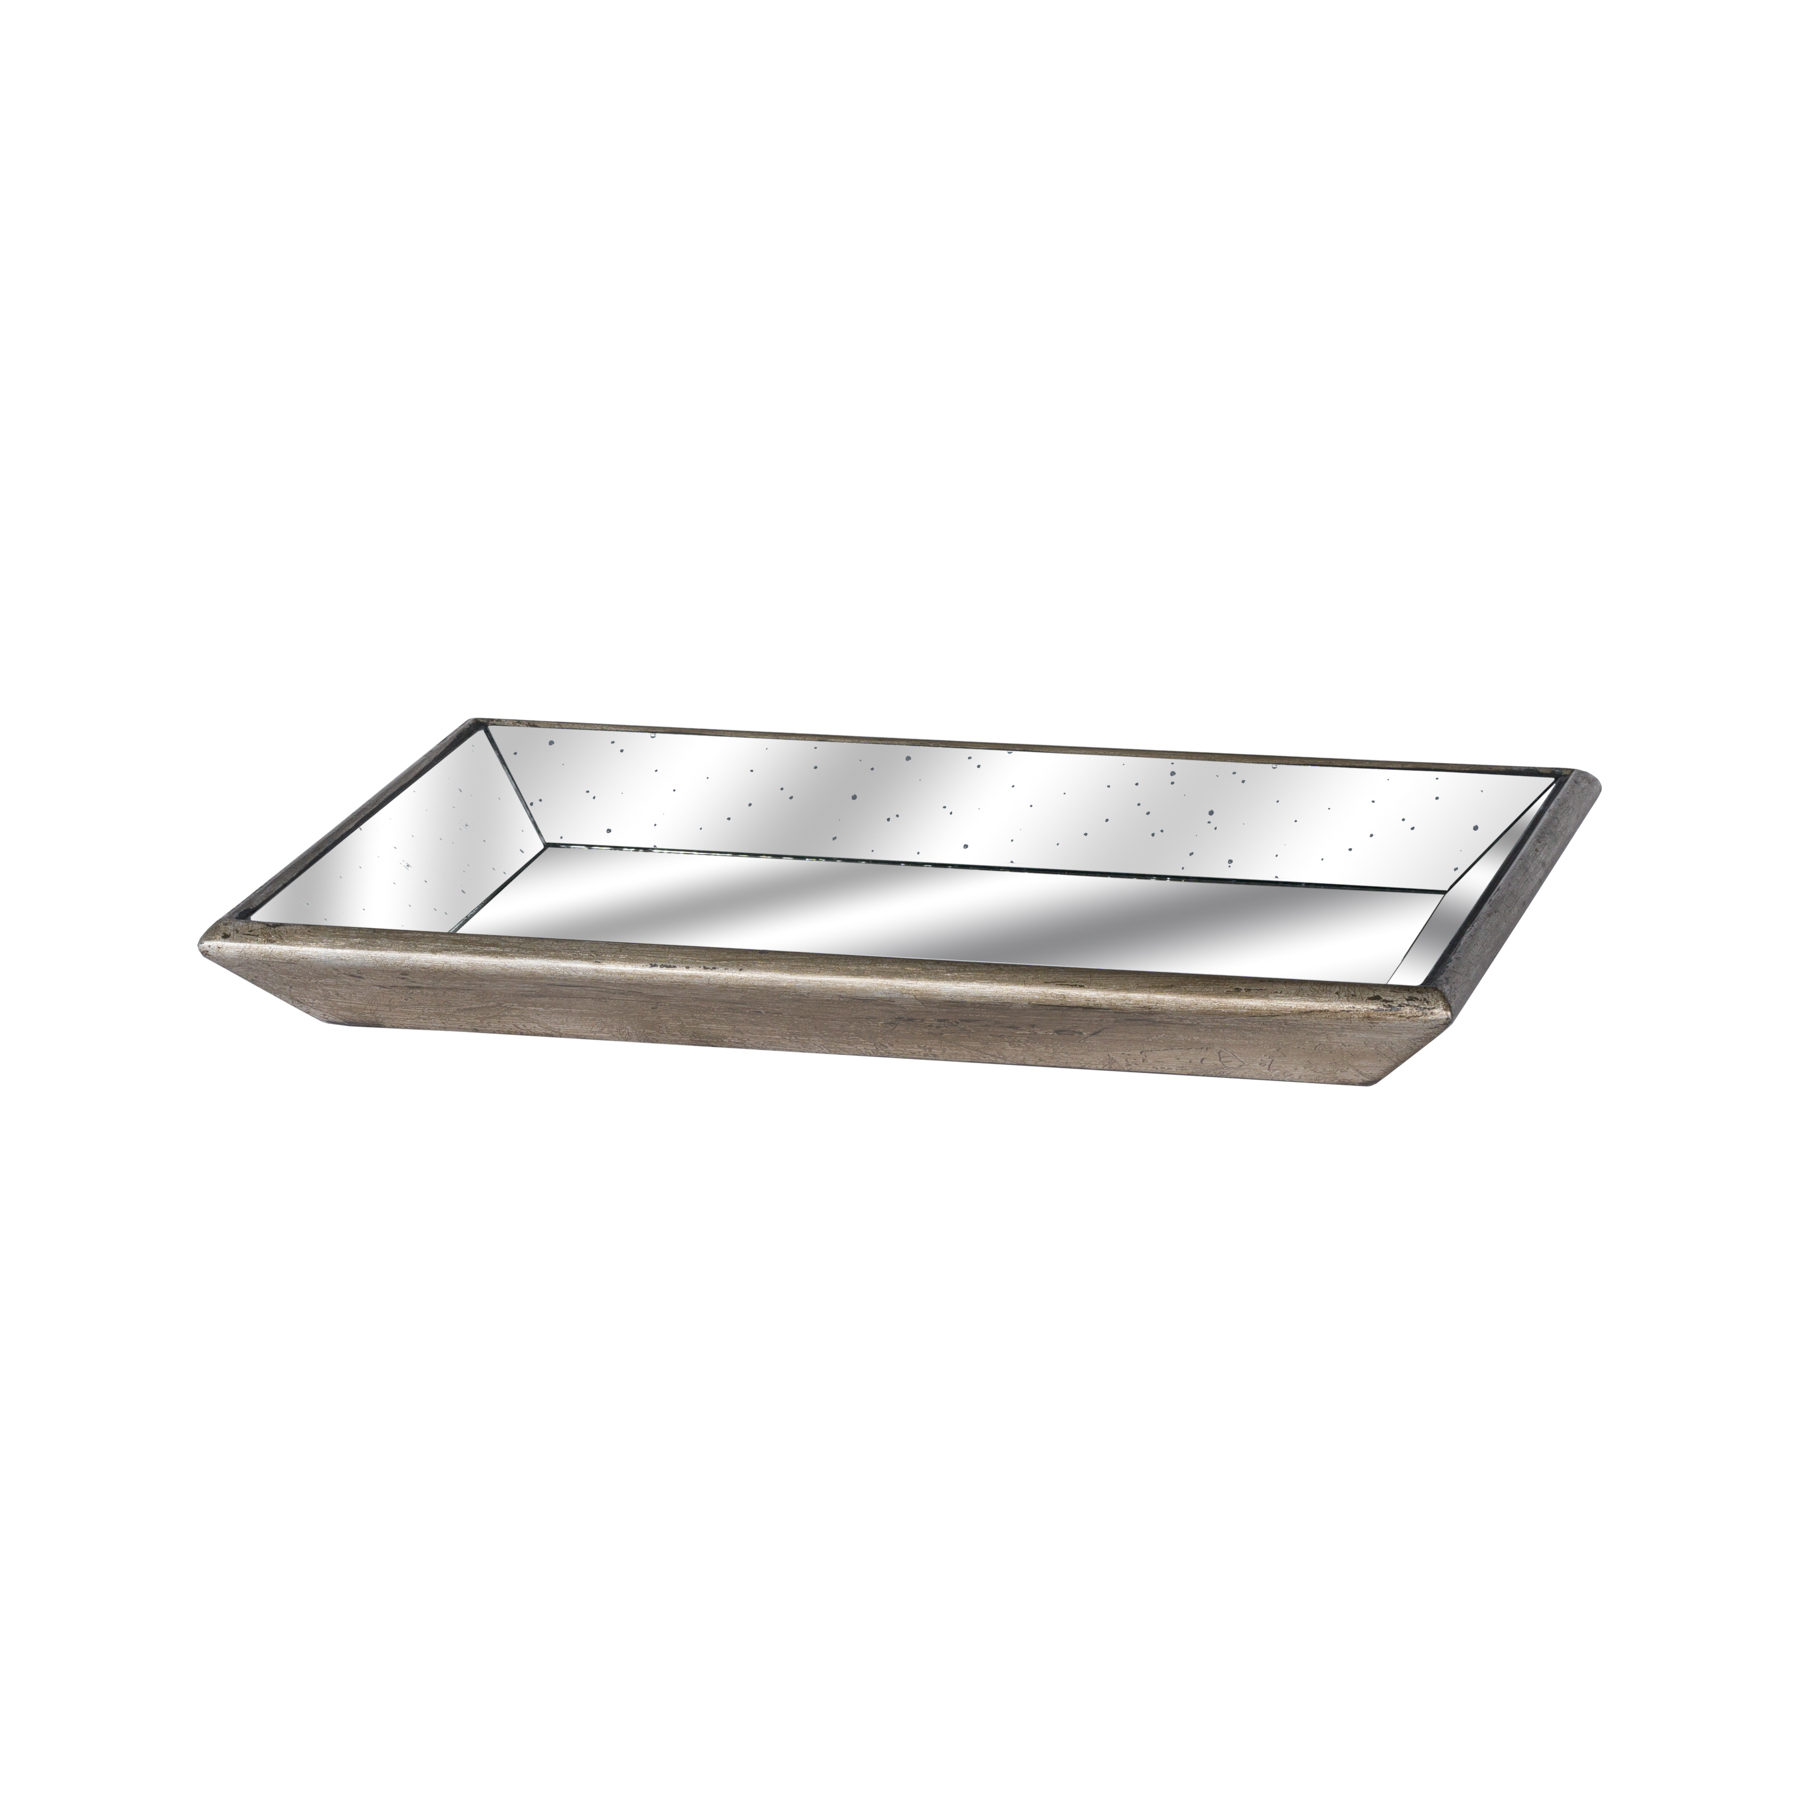 Astor Distressed Mirrored Tray With Wooden Detailing - Image 1